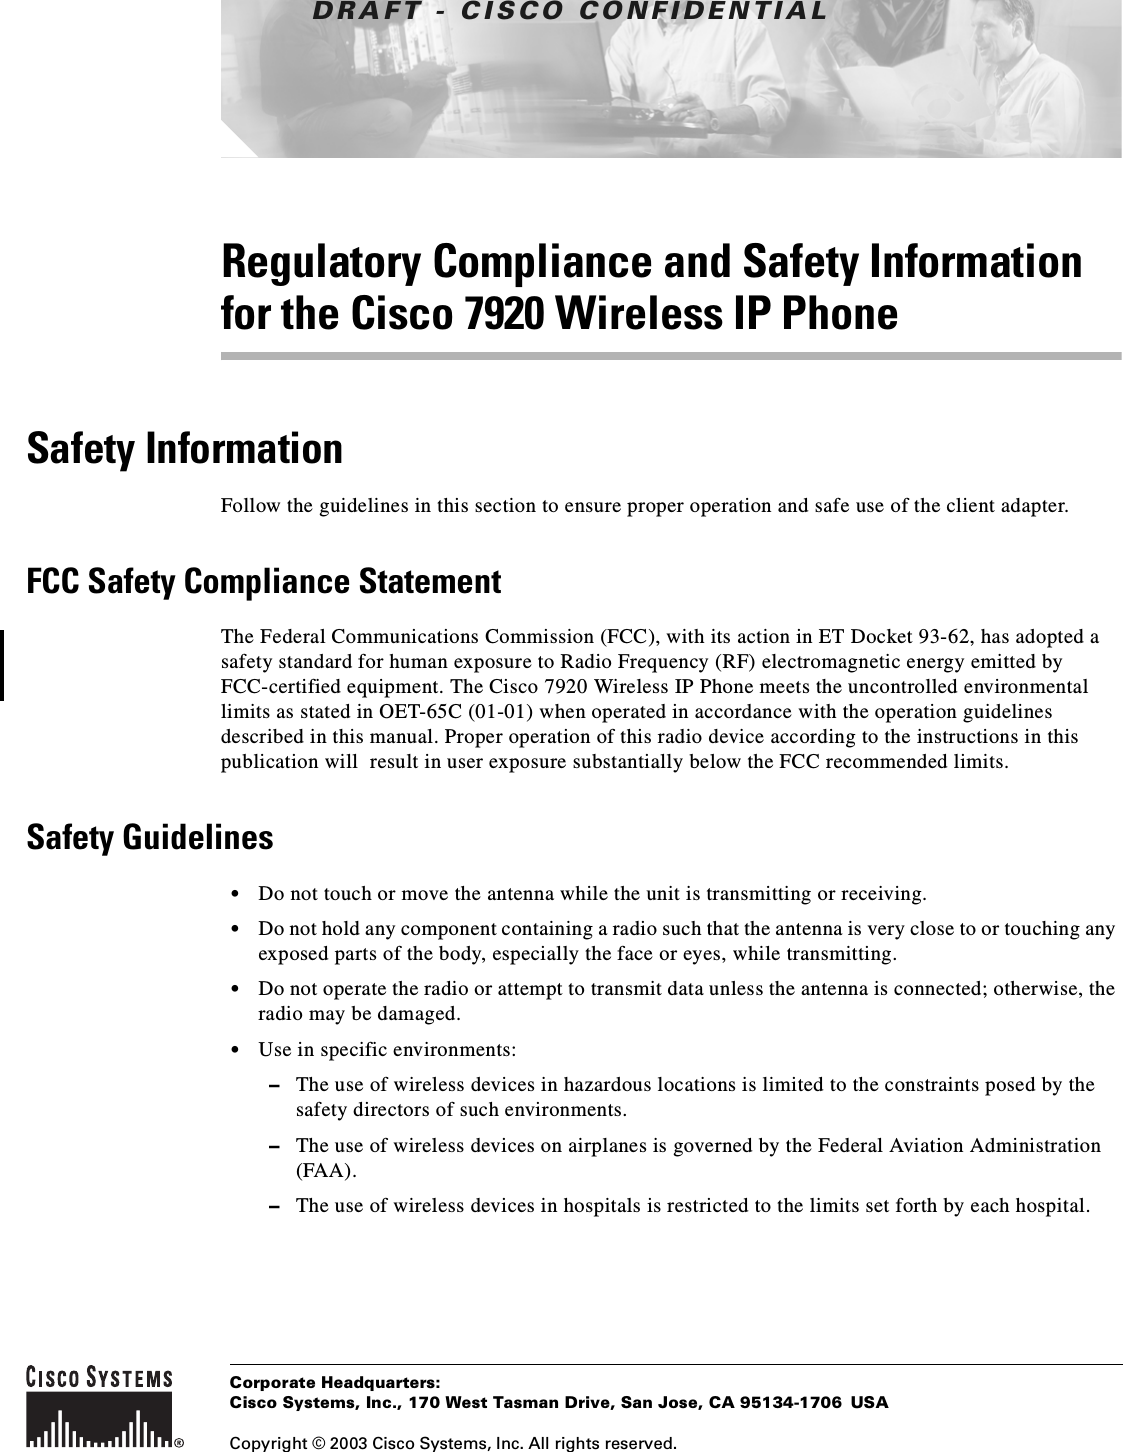 DRAFT - CISCO CONFIDENTIALCorporate Headquarters:Copyright © 2003 Cisco Systems, Inc. All rights reserved.Cisco Systems, Inc., 170 West Tasman Drive, San Jose, CA 95134-1706 USARegulatory Compliance and Safety Information for the Cisco 7920 Wireless IP PhoneSafety InformationFollow the guidelines in this section to ensure proper operation and safe use of the client adapter.FCC Safety Compliance StatementThe Federal Communications Commission (FCC), with its action in ET Docket 93-62, has adopted a safety standard for human exposure to Radio Frequency (RF) electromagnetic energy emitted by FCC-certified equipment. The Cisco 7920 Wireless IP Phone meets the uncontrolled environmental limits as stated in OET-65C (01-01) when operated in accordance with the operation guidelines described in this manual. Proper operation of this radio device according to the instructions in this publication will result in user exposure substantially below the FCC recommended limits.Safety Guidelines•Do not touch or move the antenna while the unit is transmitting or receiving.•Do not hold any component containing a radio such that the antenna is very close to or touching any exposed parts of the body, especially the face or eyes, while transmitting.•Do not operate the radio or attempt to transmit data unless the antenna is connected; otherwise, the radio may be damaged.•Use in specific environments:–The use of wireless devices in hazardous locations is limited to the constraints posed by thesafety directors of such environments.–The use of wireless devices on airplanes is governed by the Federal Aviation Administration(FAA).–The use of wireless devices in hospitals is restricted to the limits set forth by each hospital.